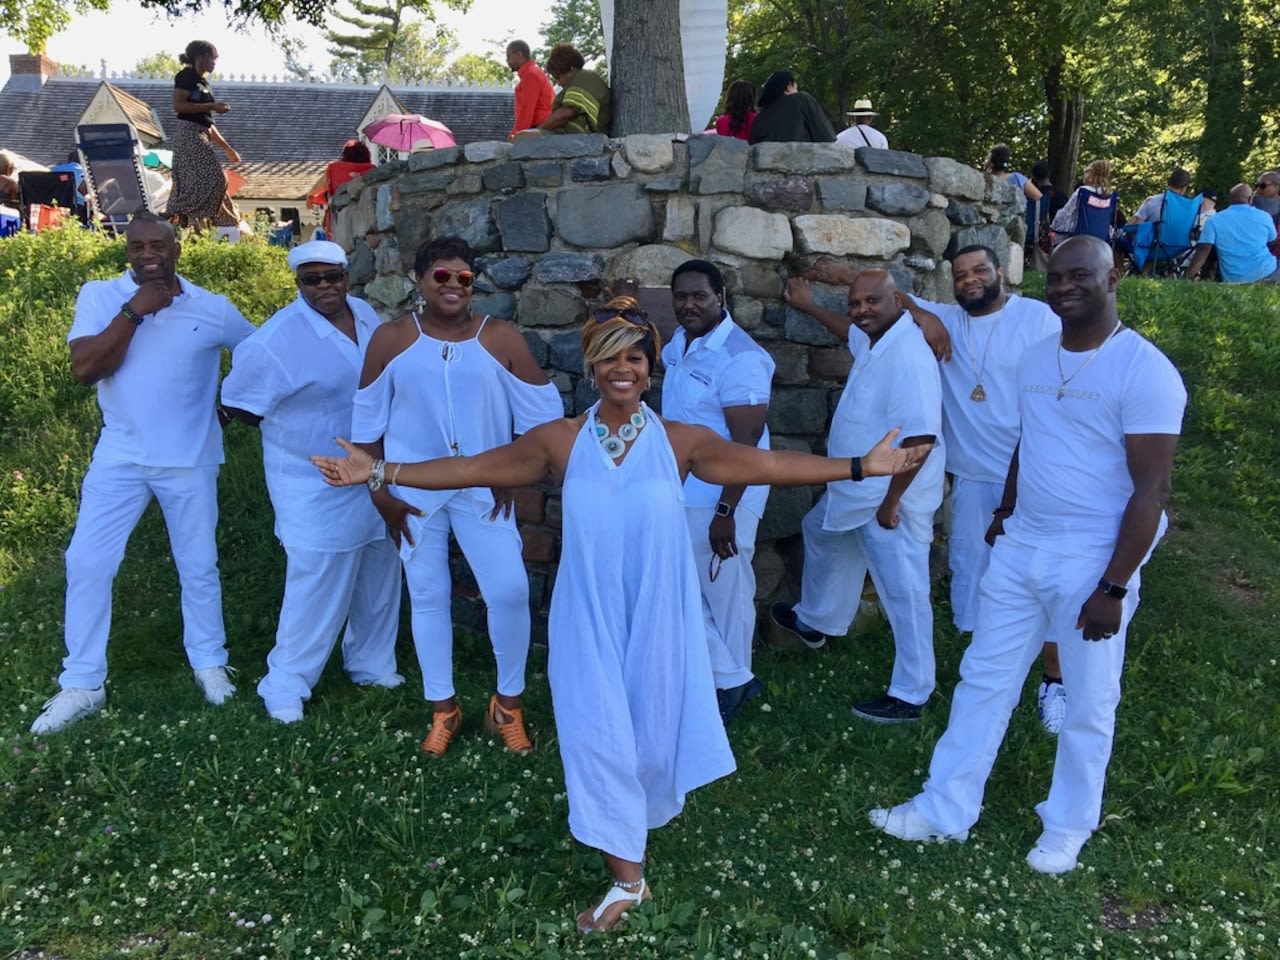 Annual ‘Smooth Sounds by the Sea’ R&B and jazz concert set for Sunday on Staten Island